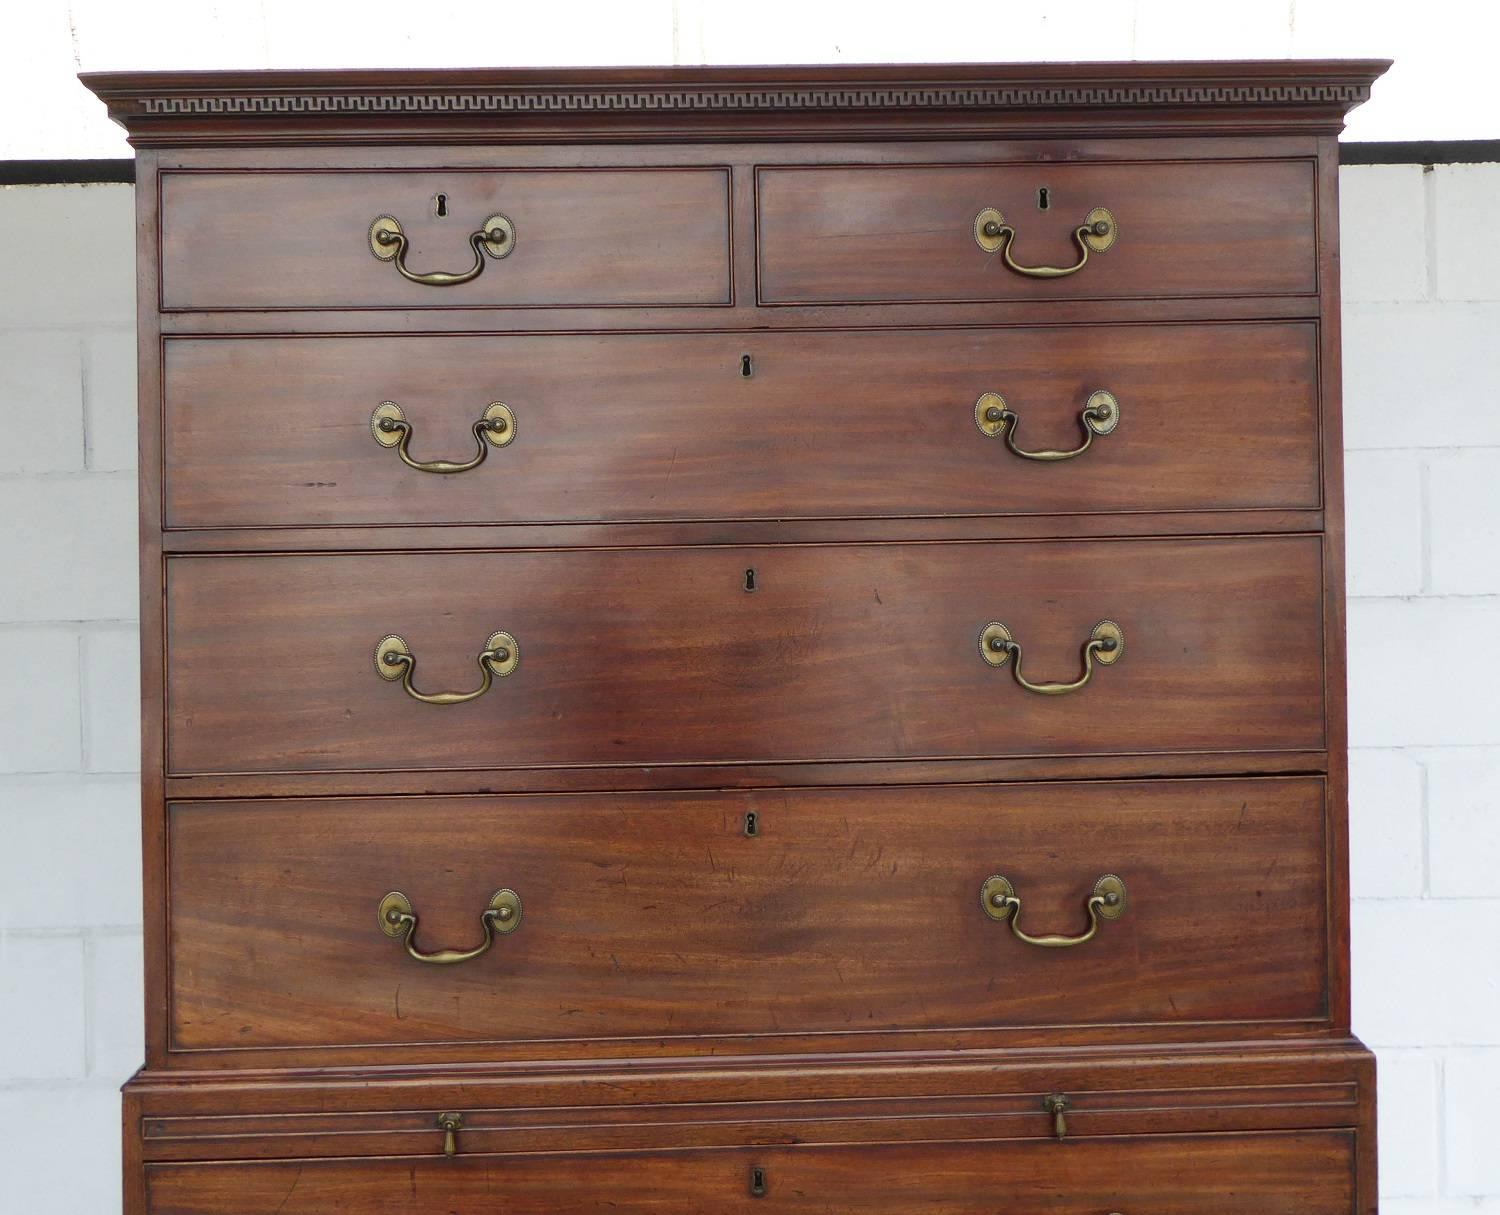 For sale is a good quality George III mahogany chest on chest. The top of the chest has an assortment of five drawers, having two short drawers and the top, with three graduated drawers below. This fits onto the base section, which is complete with